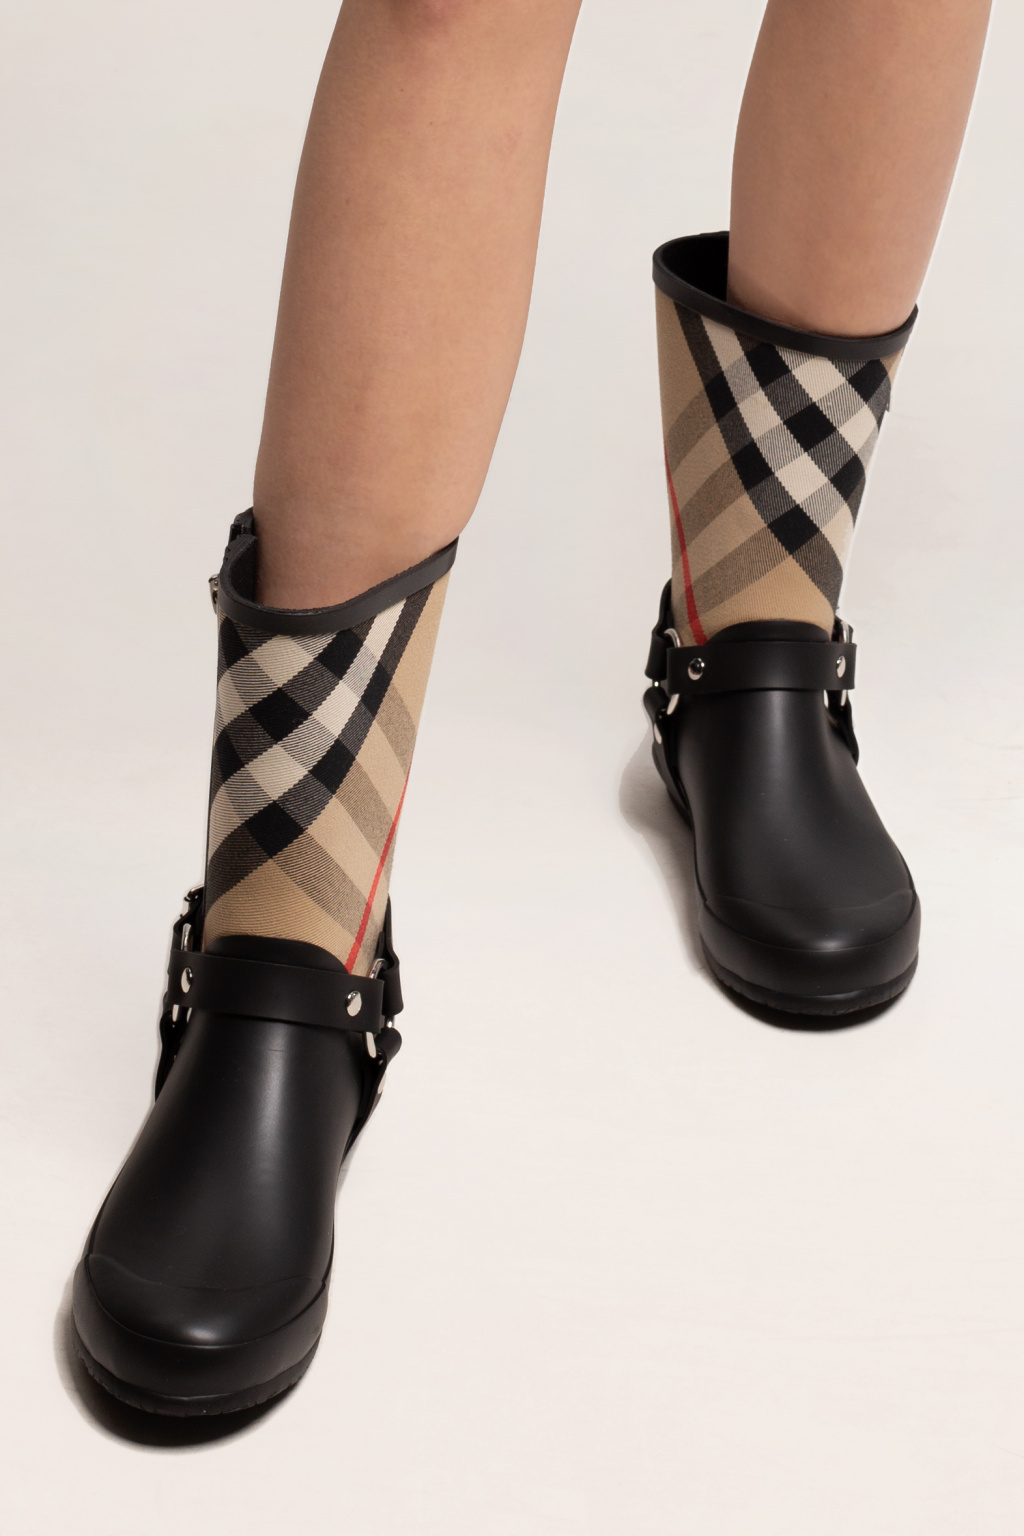 burberry swimsuit ‘House Check’ rain boots